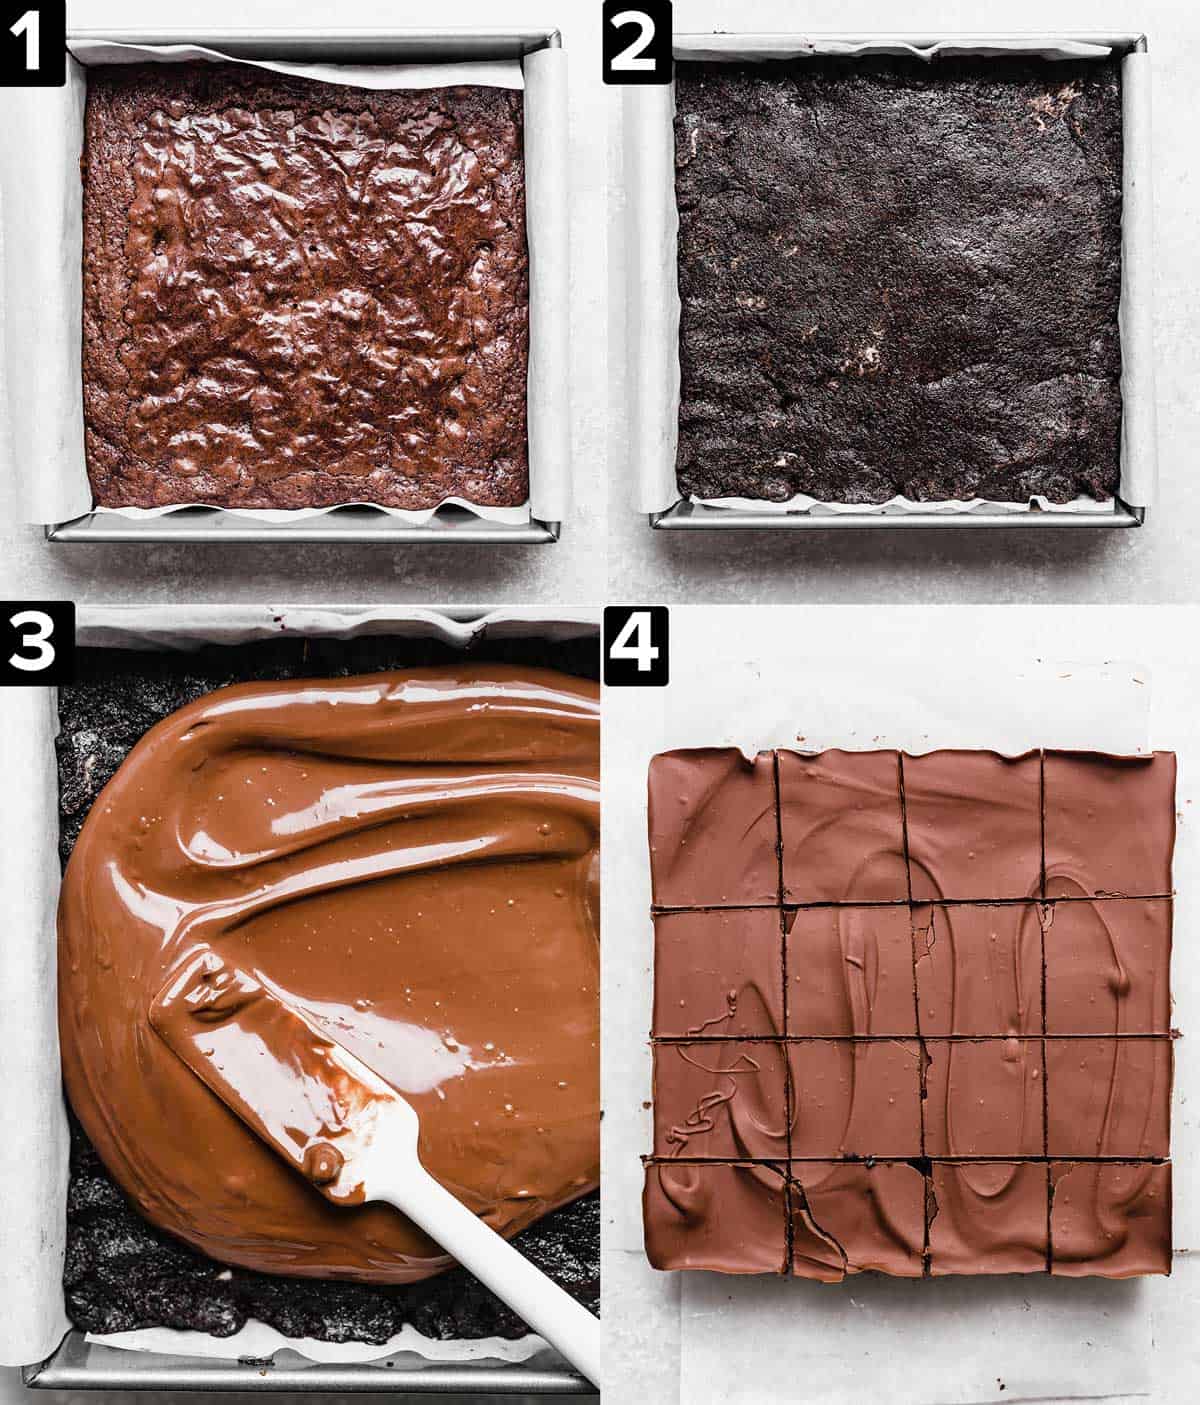 Four photos showing how to make Oreo Truffle Brownies, a square pan filled with brownies then topped with Oreo truffle layer, and melted chocolate spread overtop, and then the brownies cut into squares.